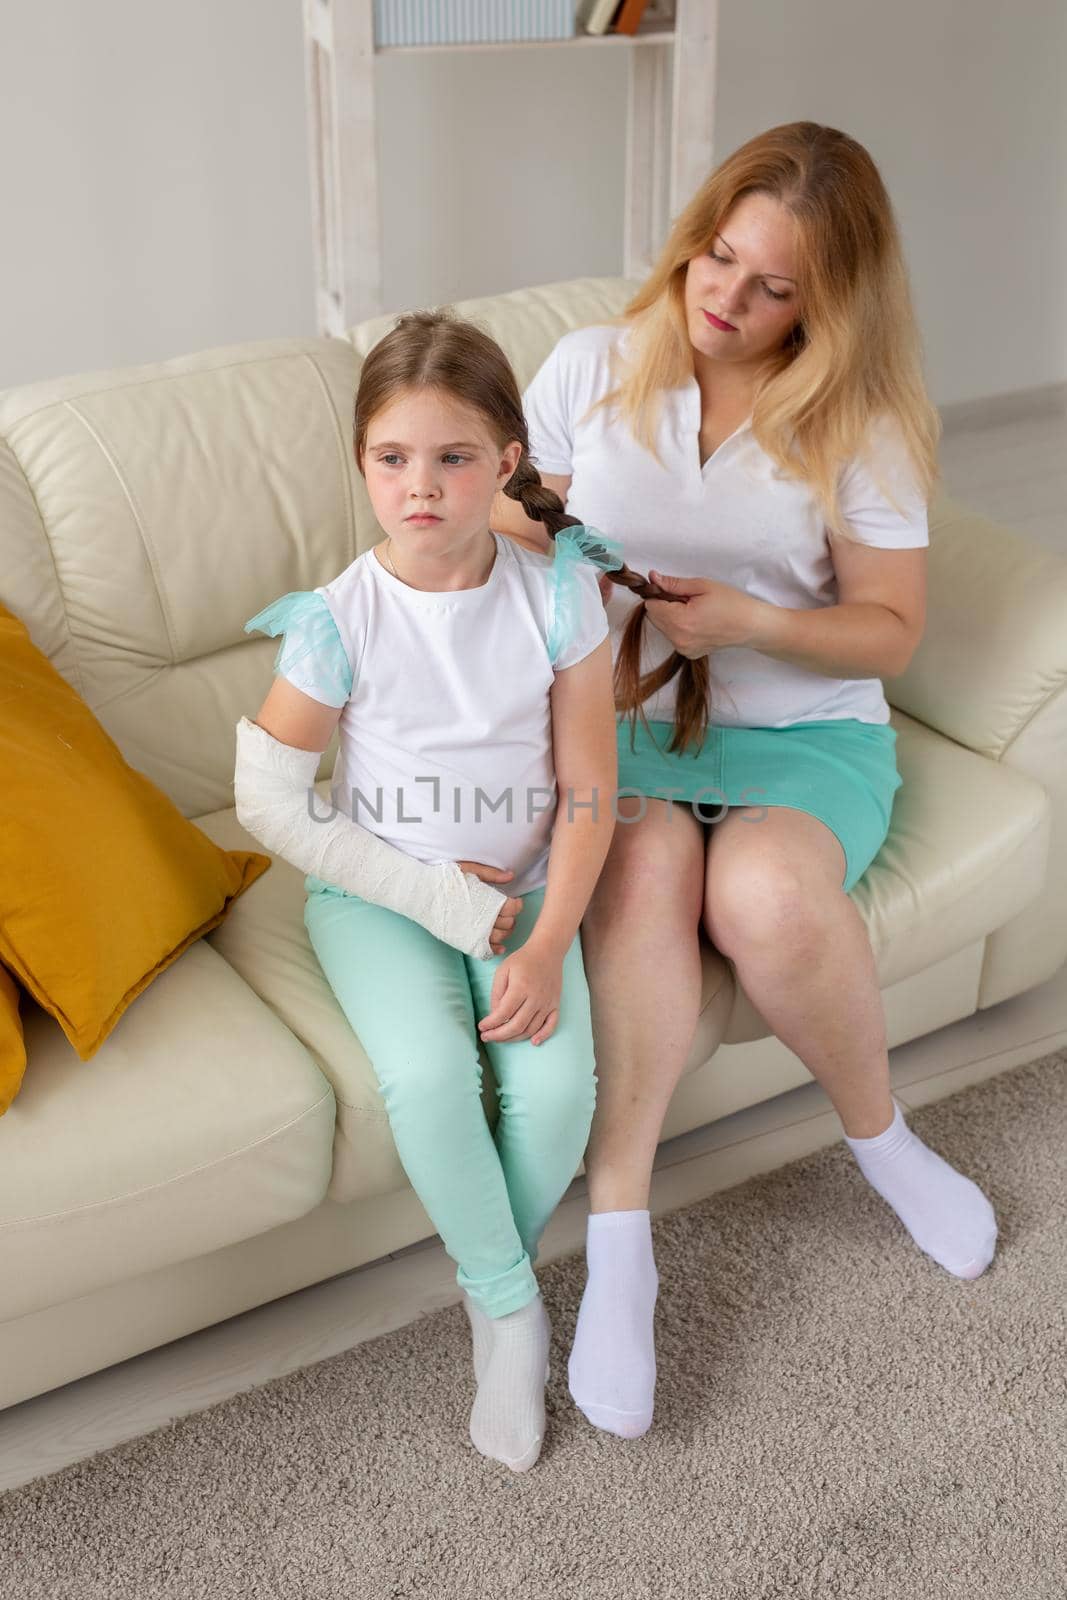 Child with broken arm and gypsum spend time at home with mother. Childhood illnesses, a positive outlook and recovery. by Satura86